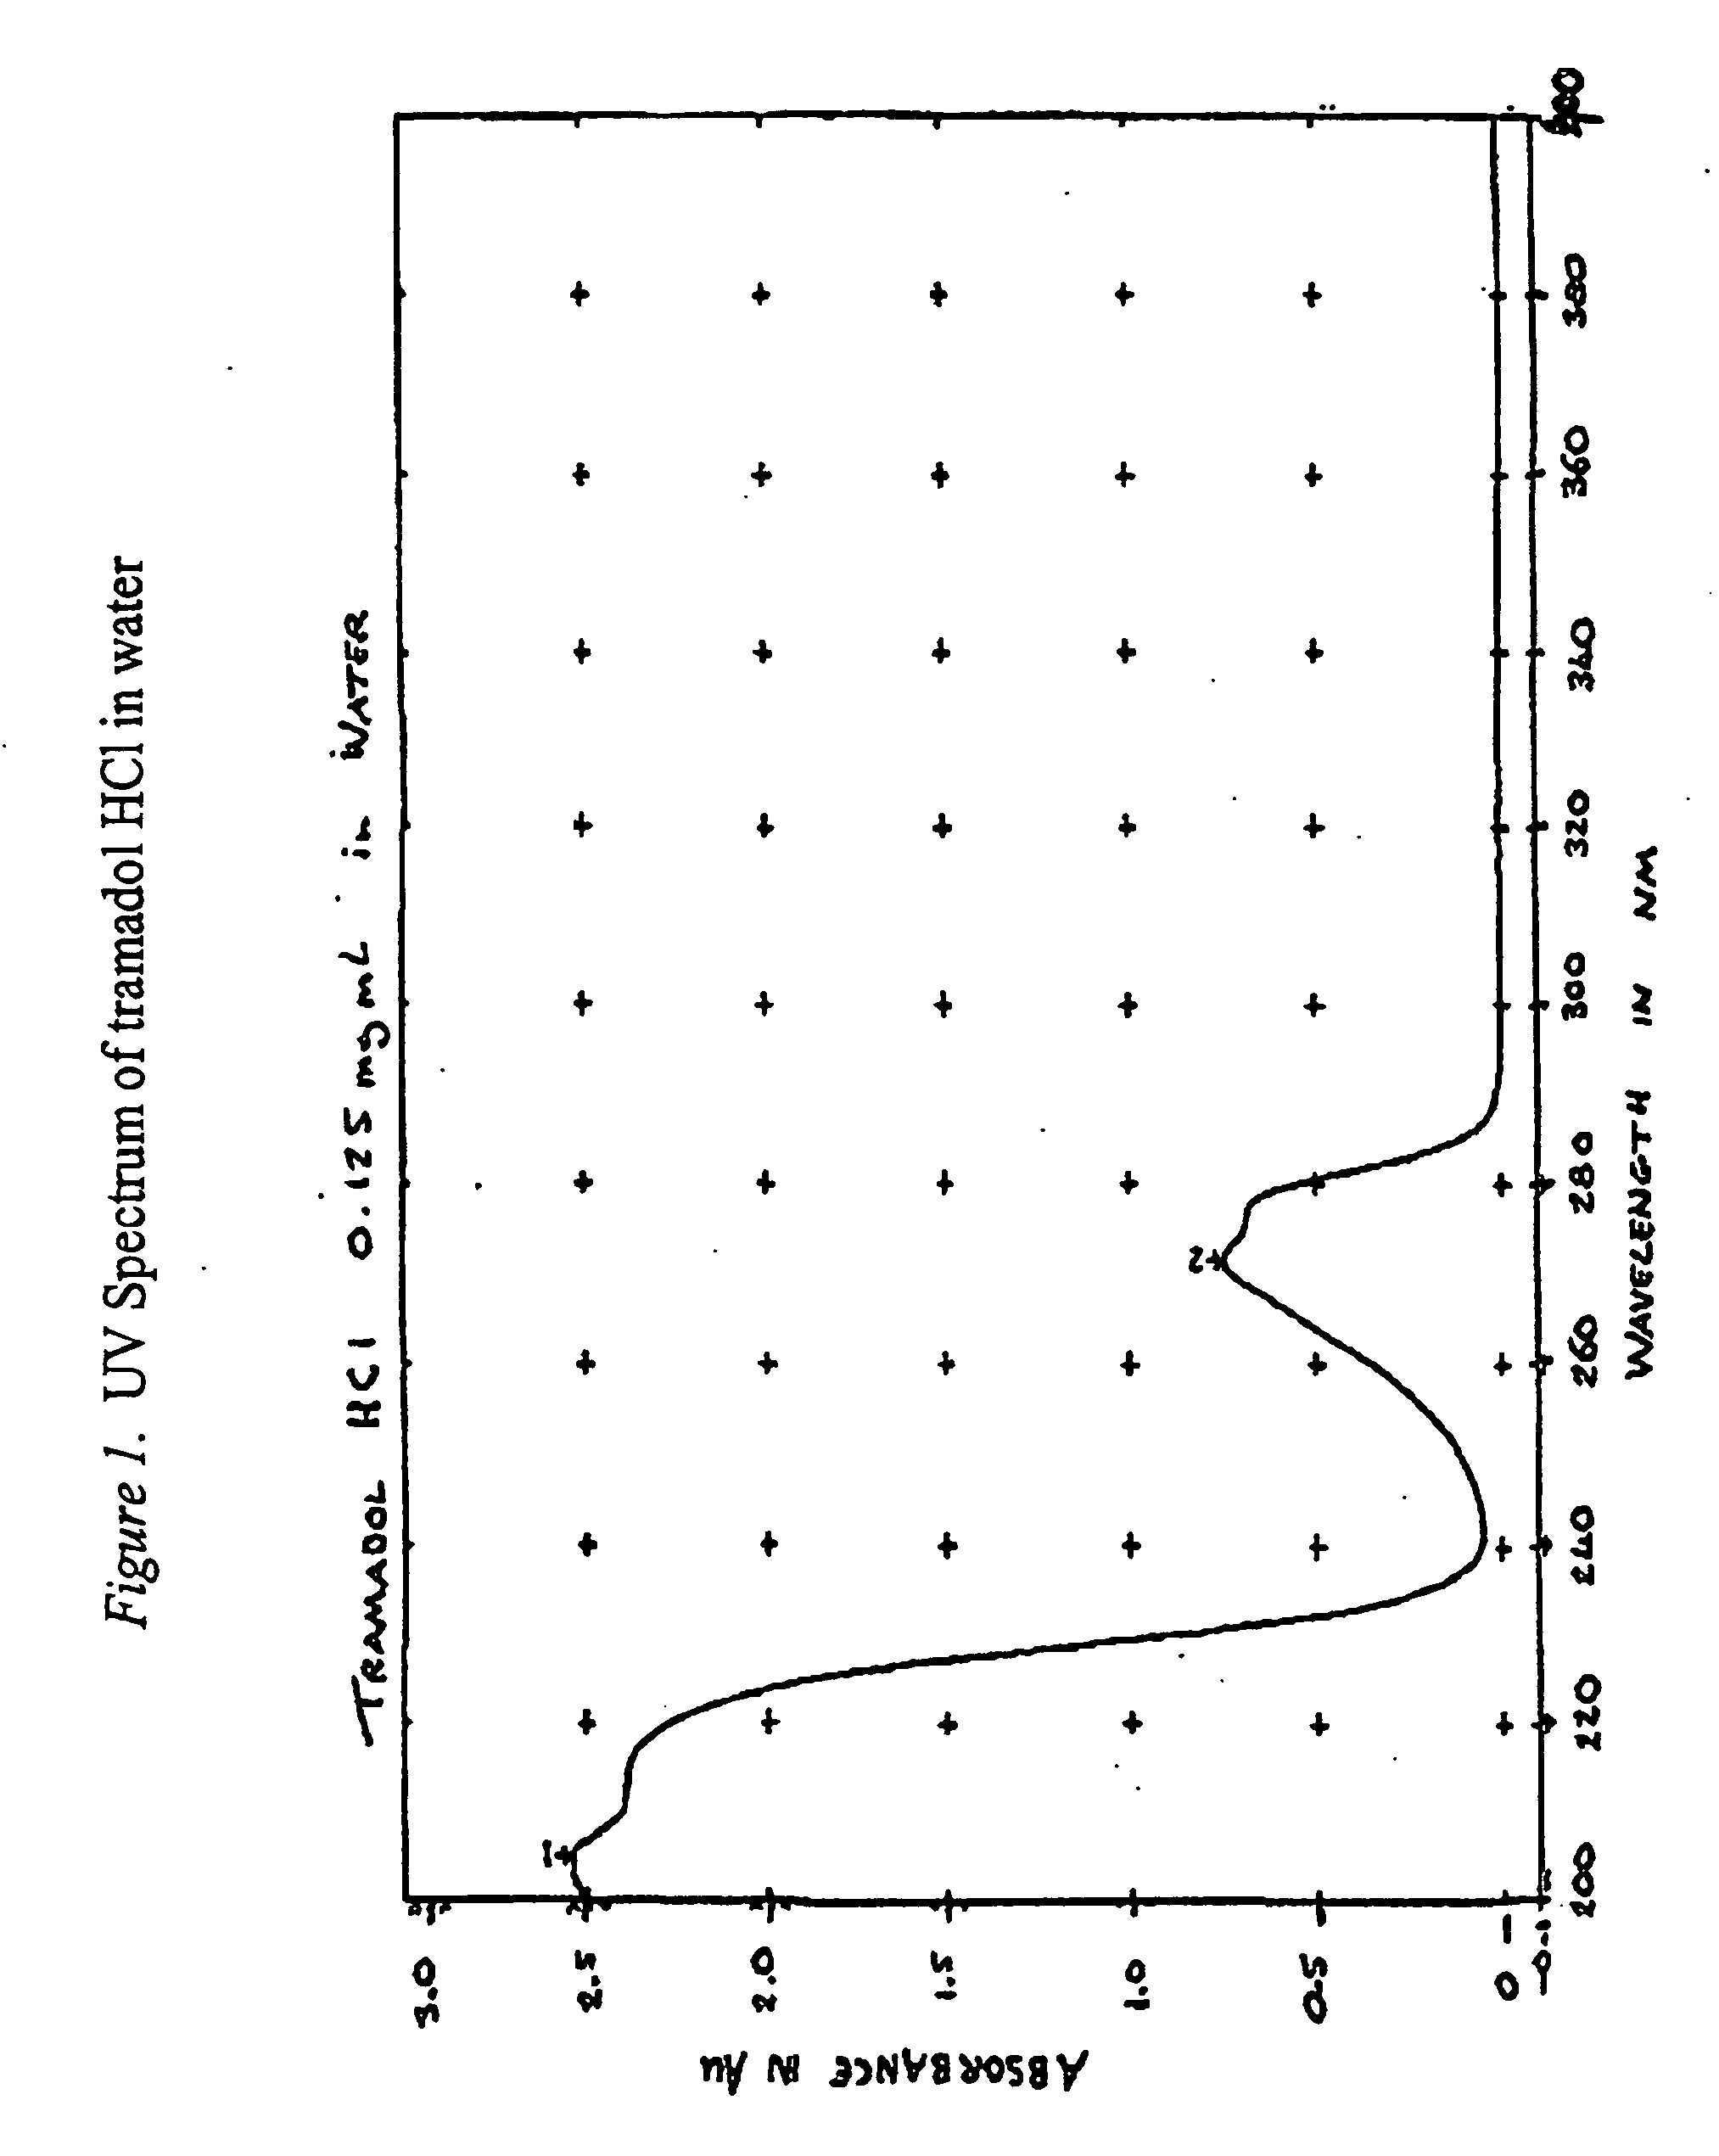 Abuse Resistant and Extended Release Formulations and Method of Use Thereof